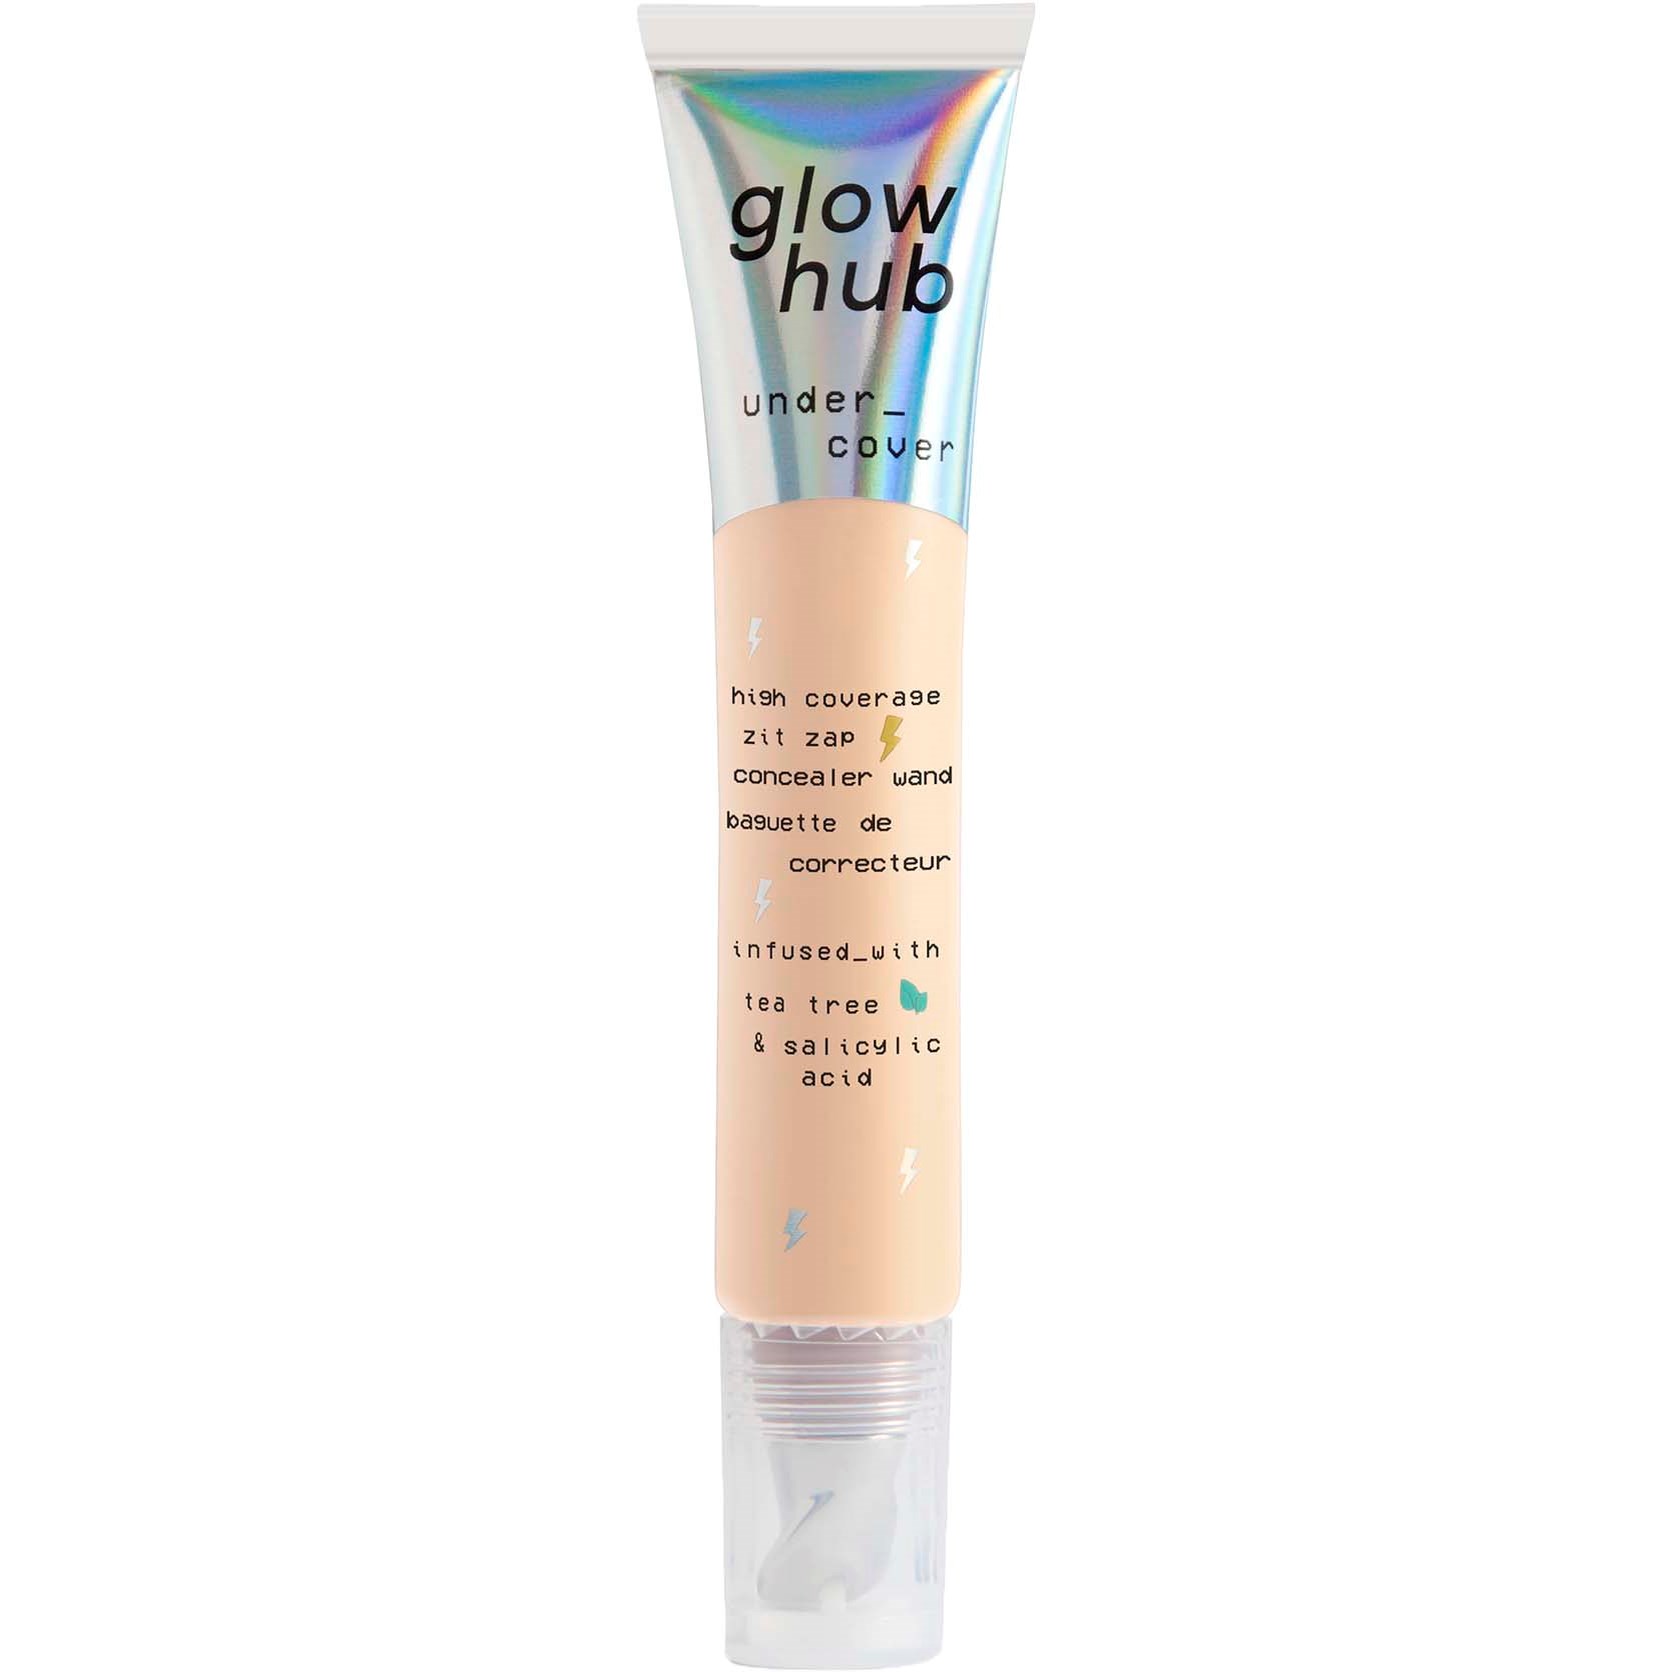 Glow Hub Under Cover High Coverage Zit Zap Concealer Wand 05C Milly